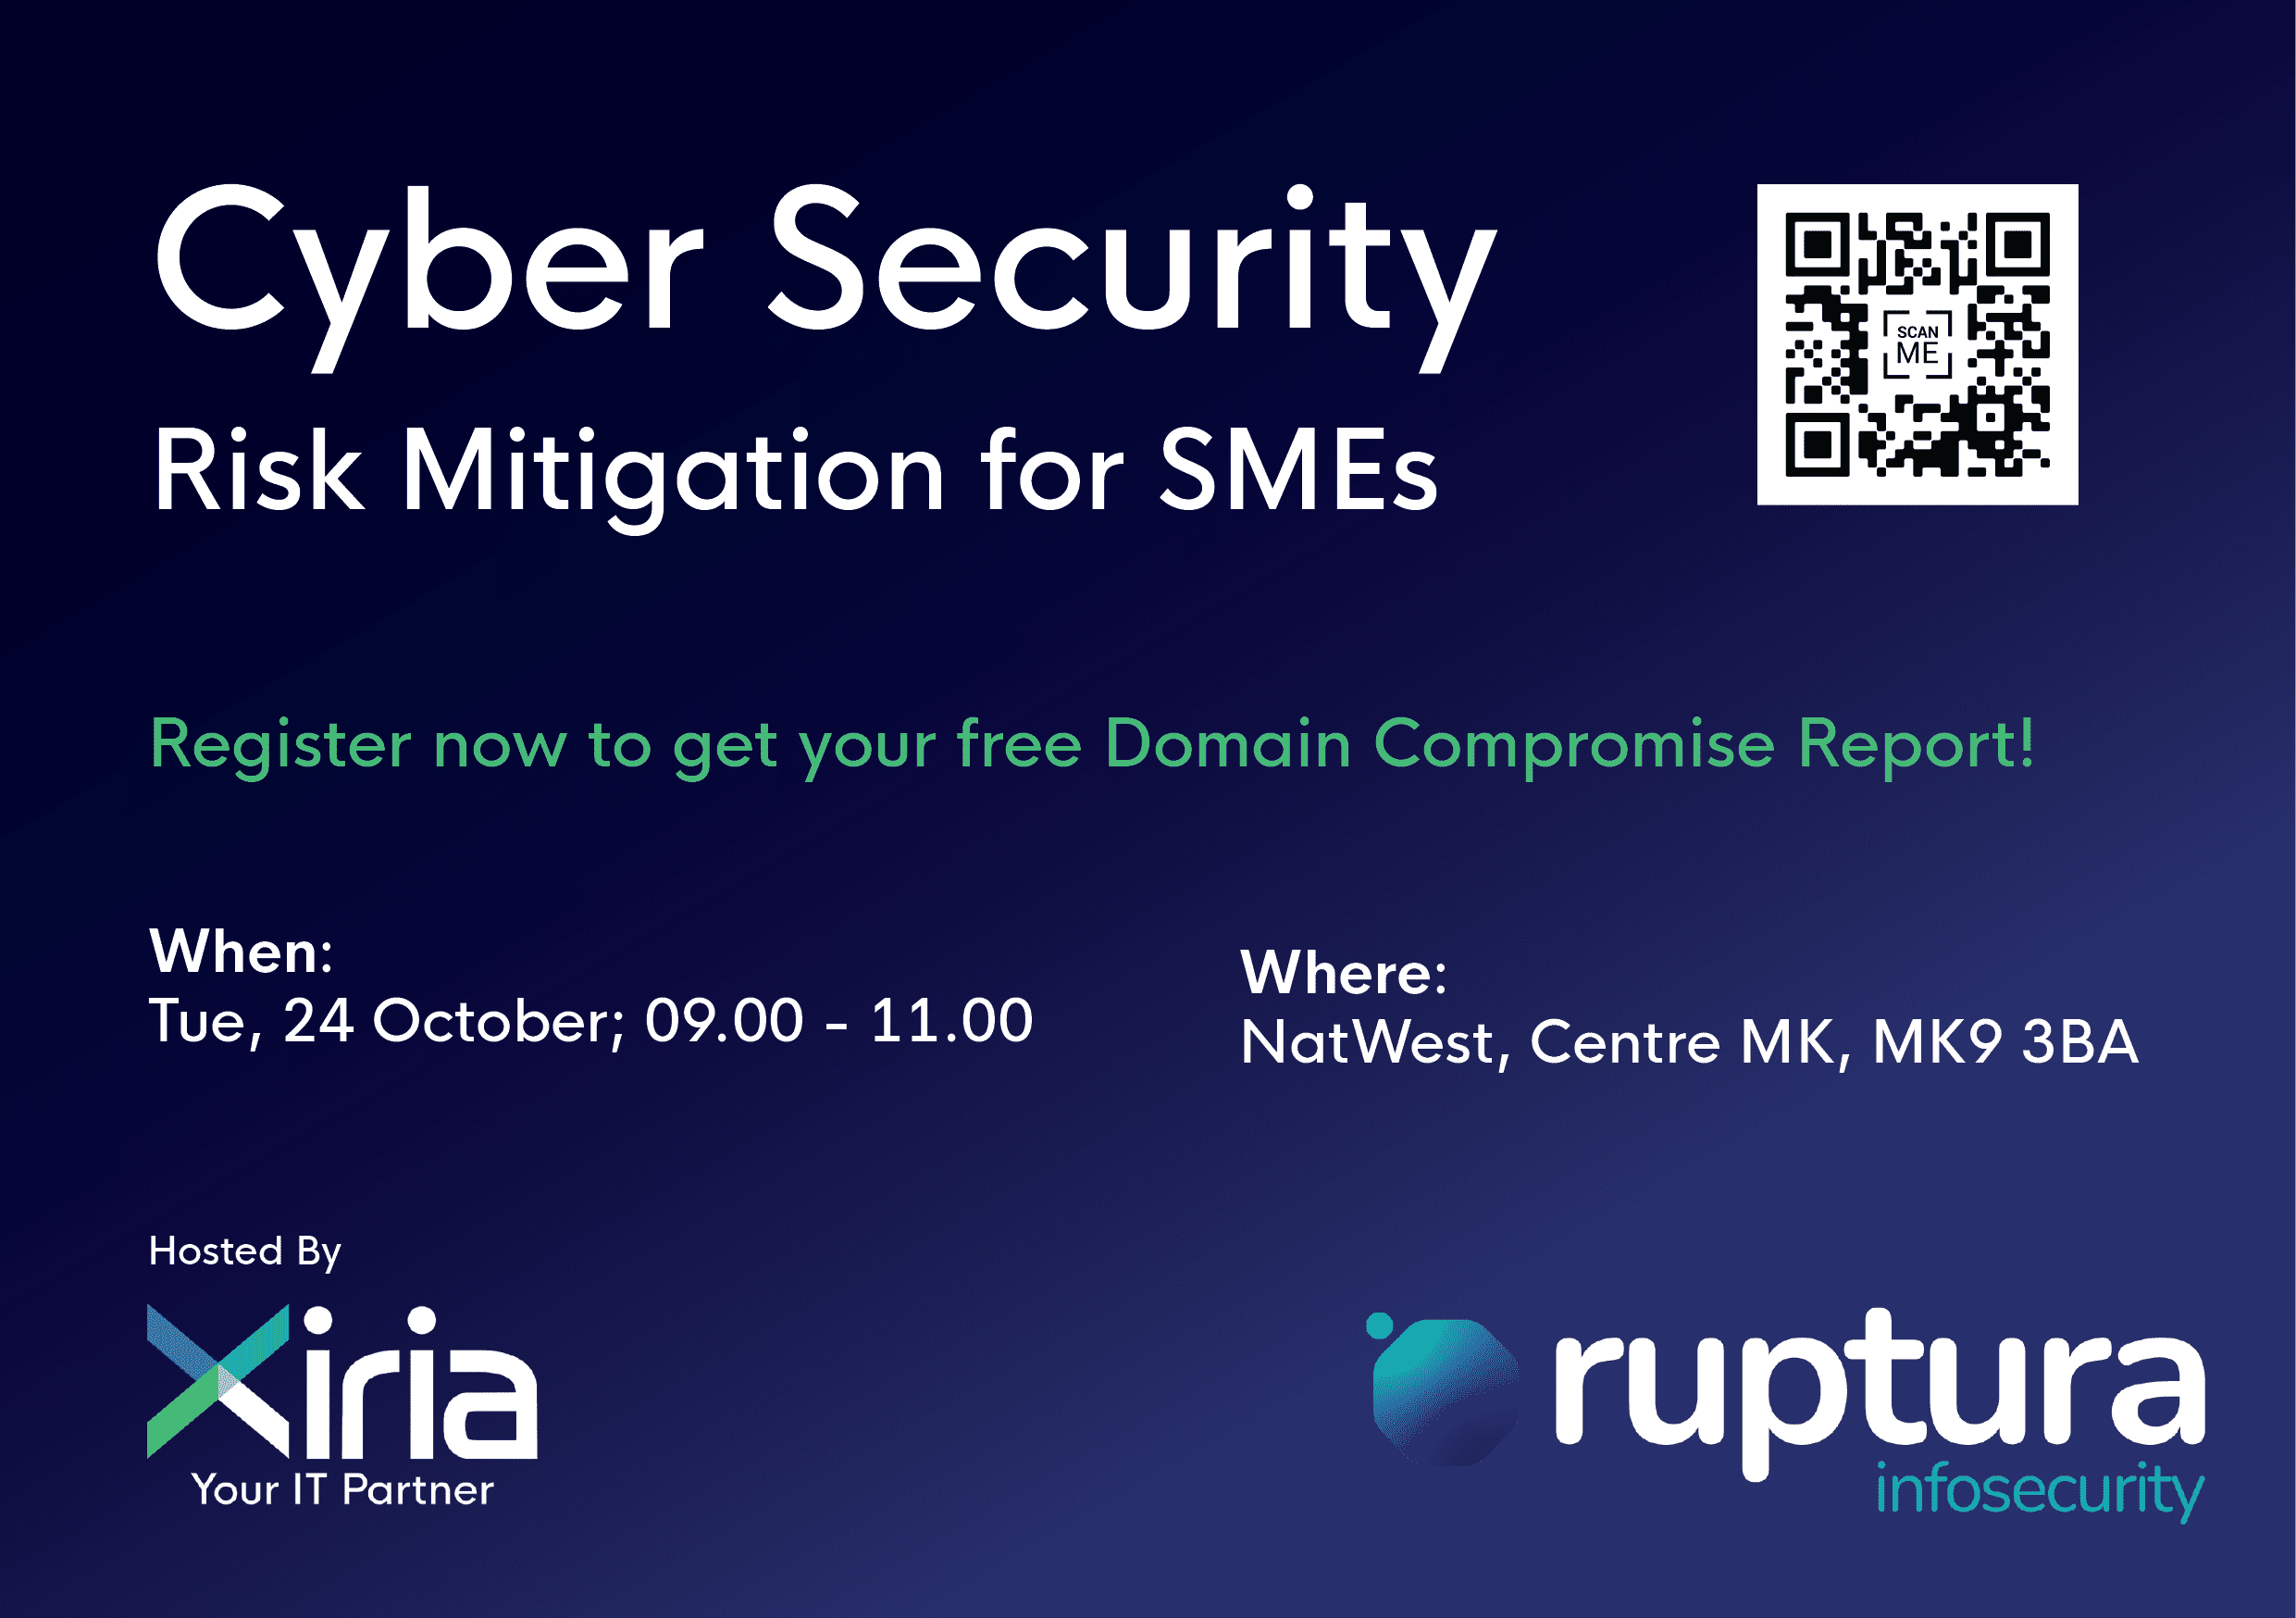 New Chamber Member, Xiria, hosts a panel of experts discussing Cyber Security Risk Mitigation for Small/Medium Enterprises. | Northamptonshire Chamber of Commerce